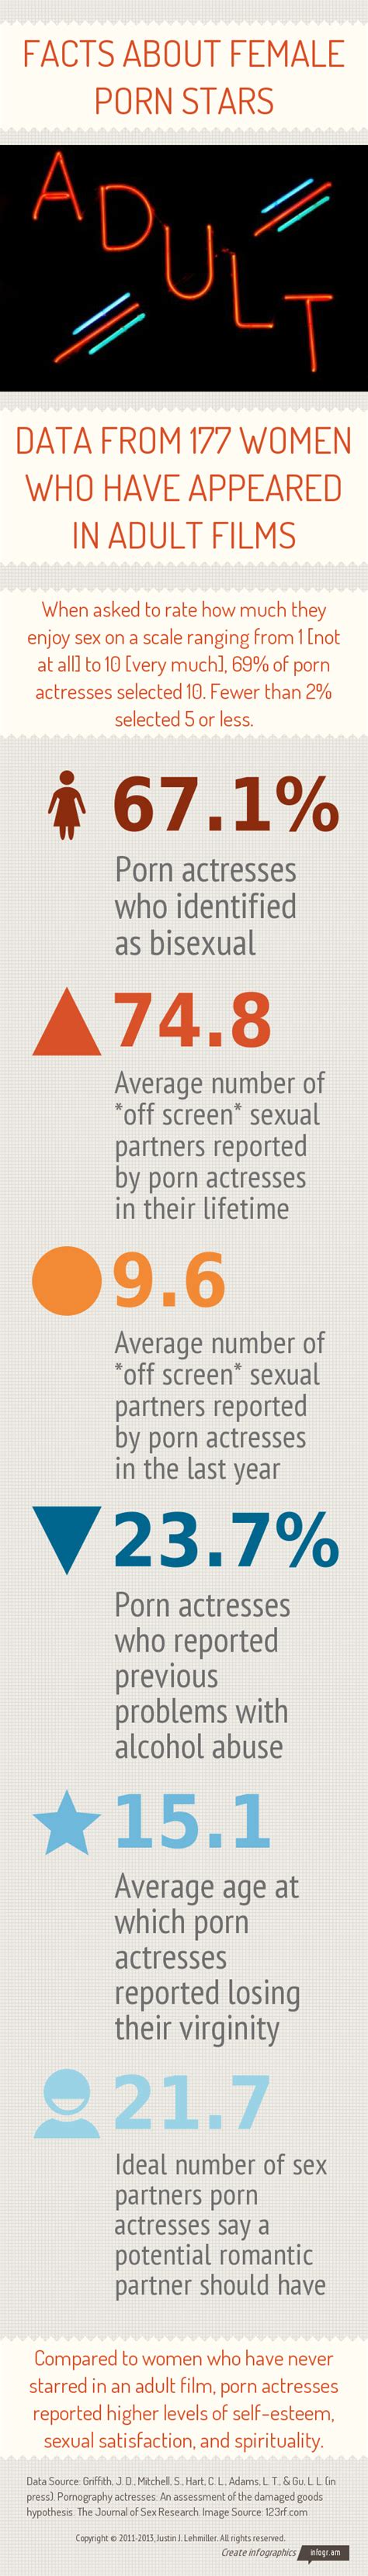 facts about female porn stars infographic — sex and